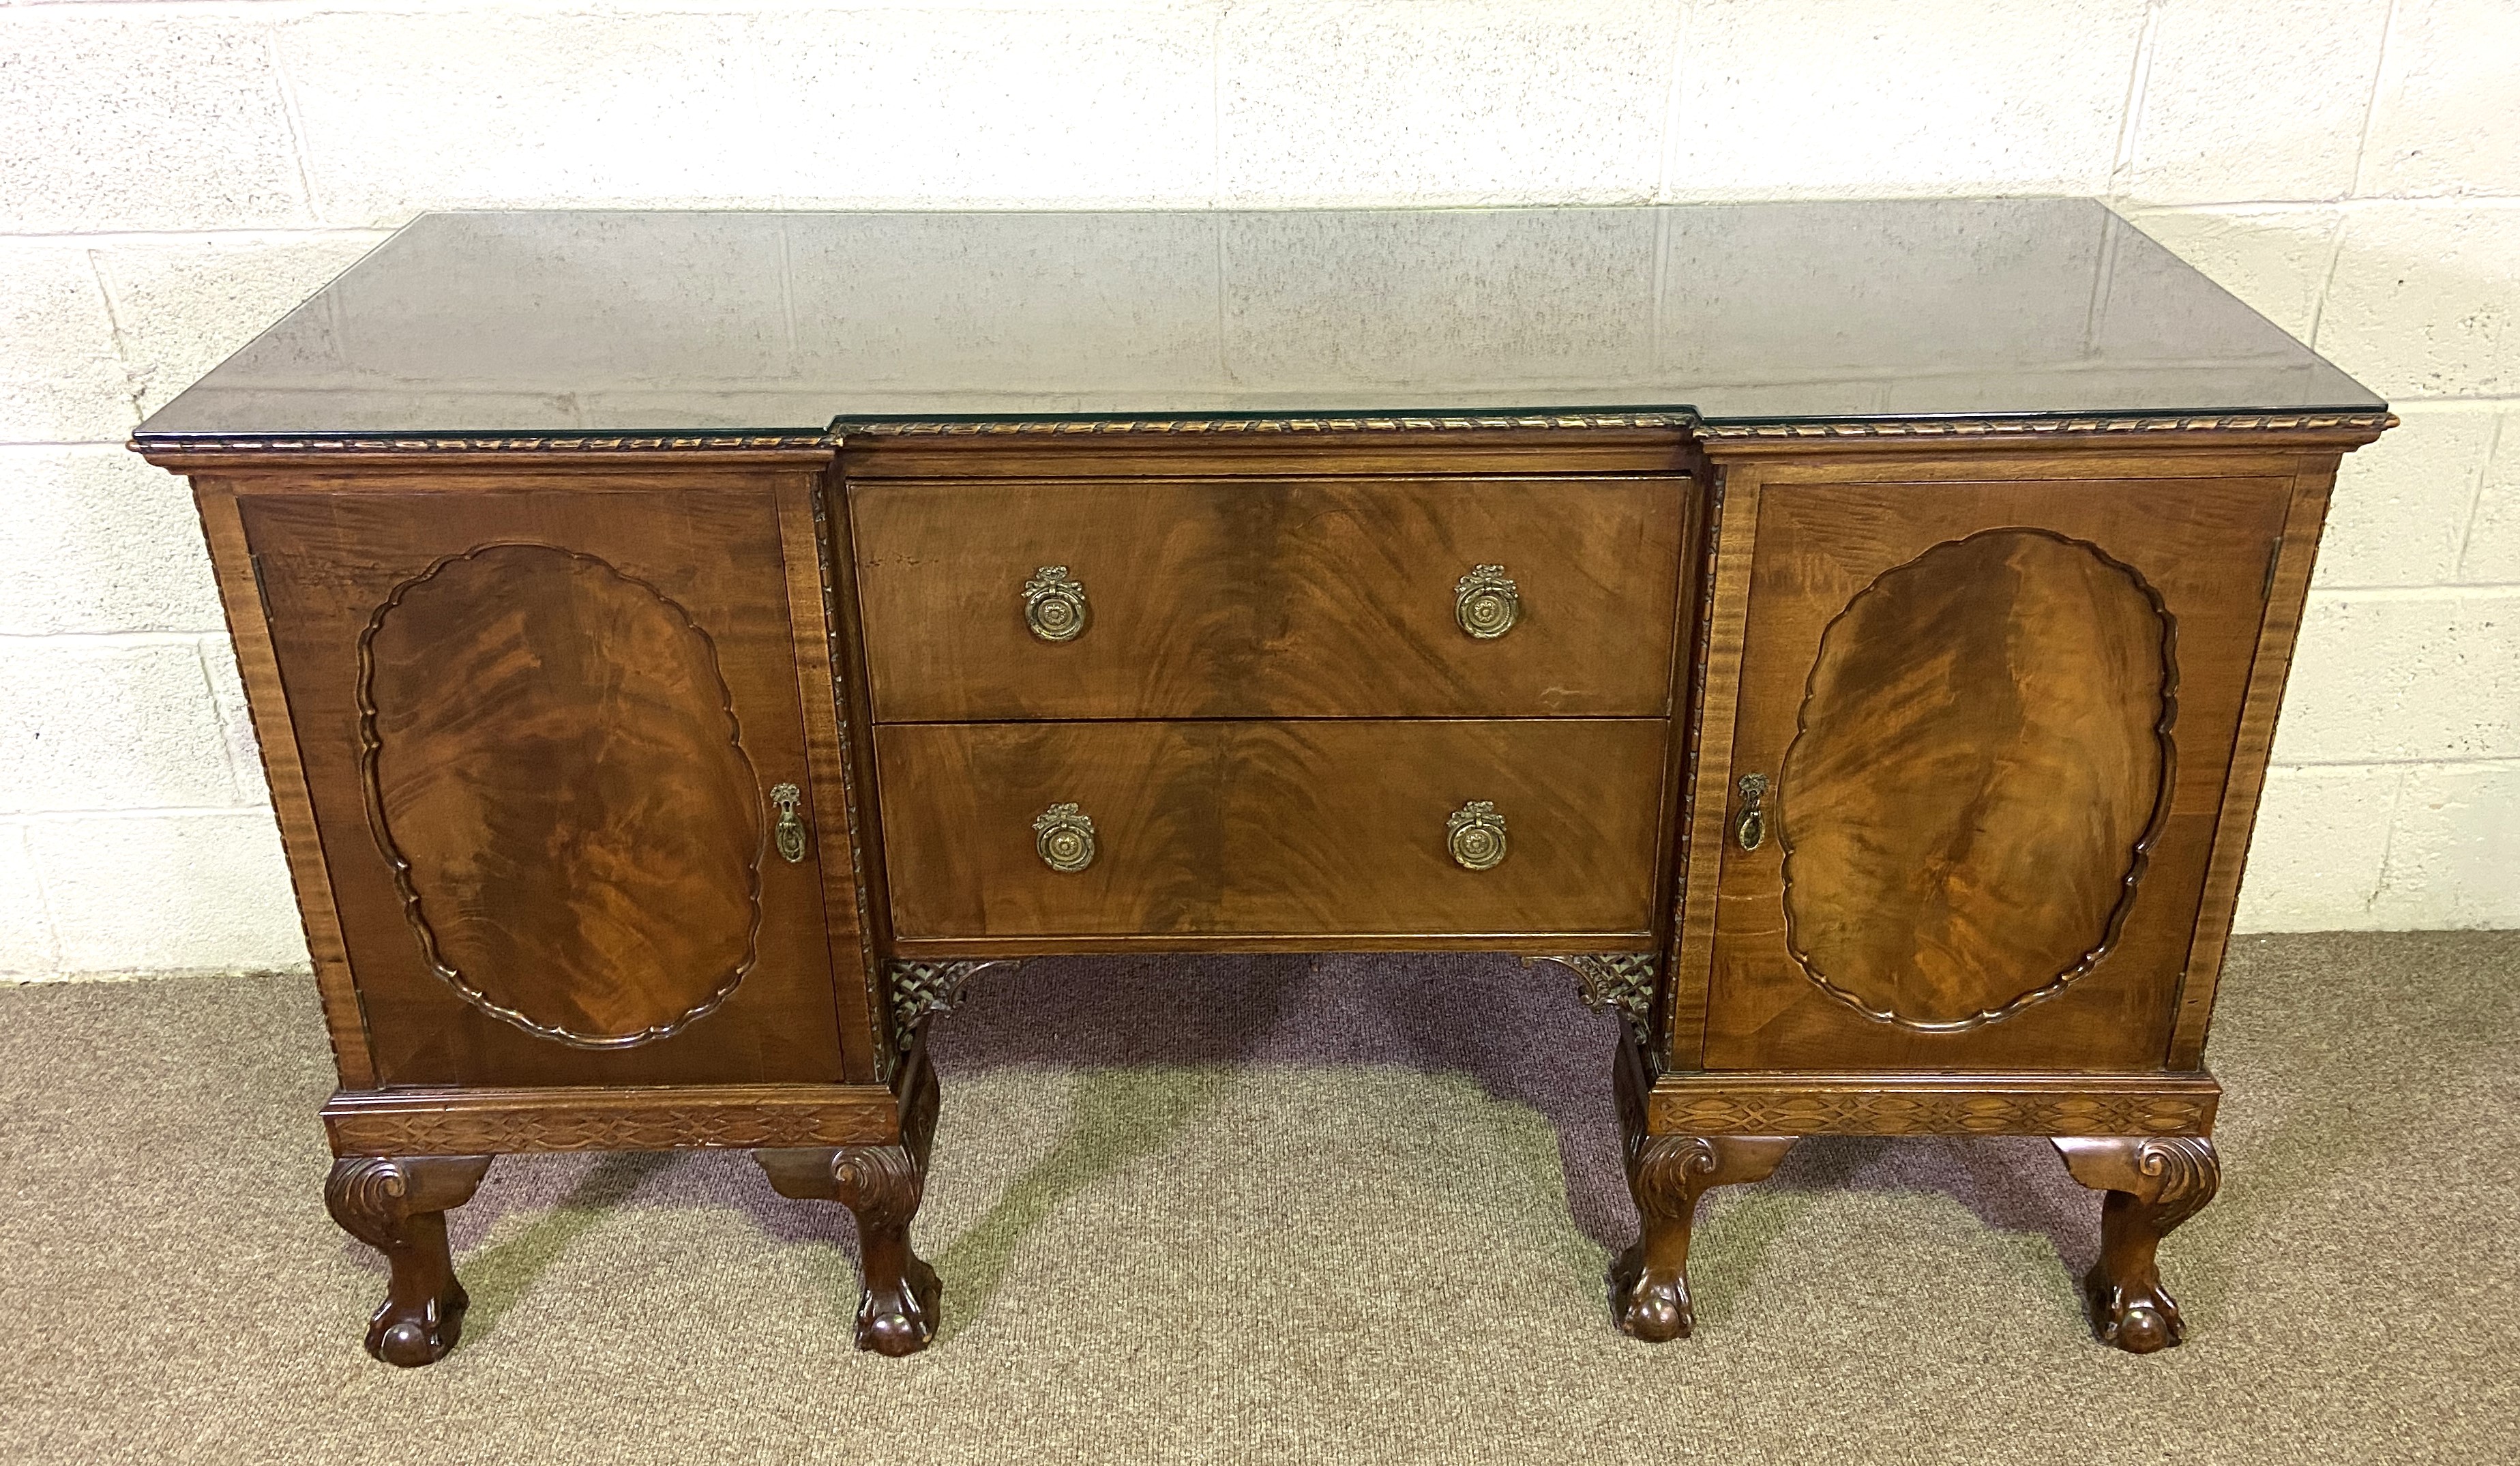 A George III style breakfront mahogany veneered sideboard, the plain top with a moulded edge, over